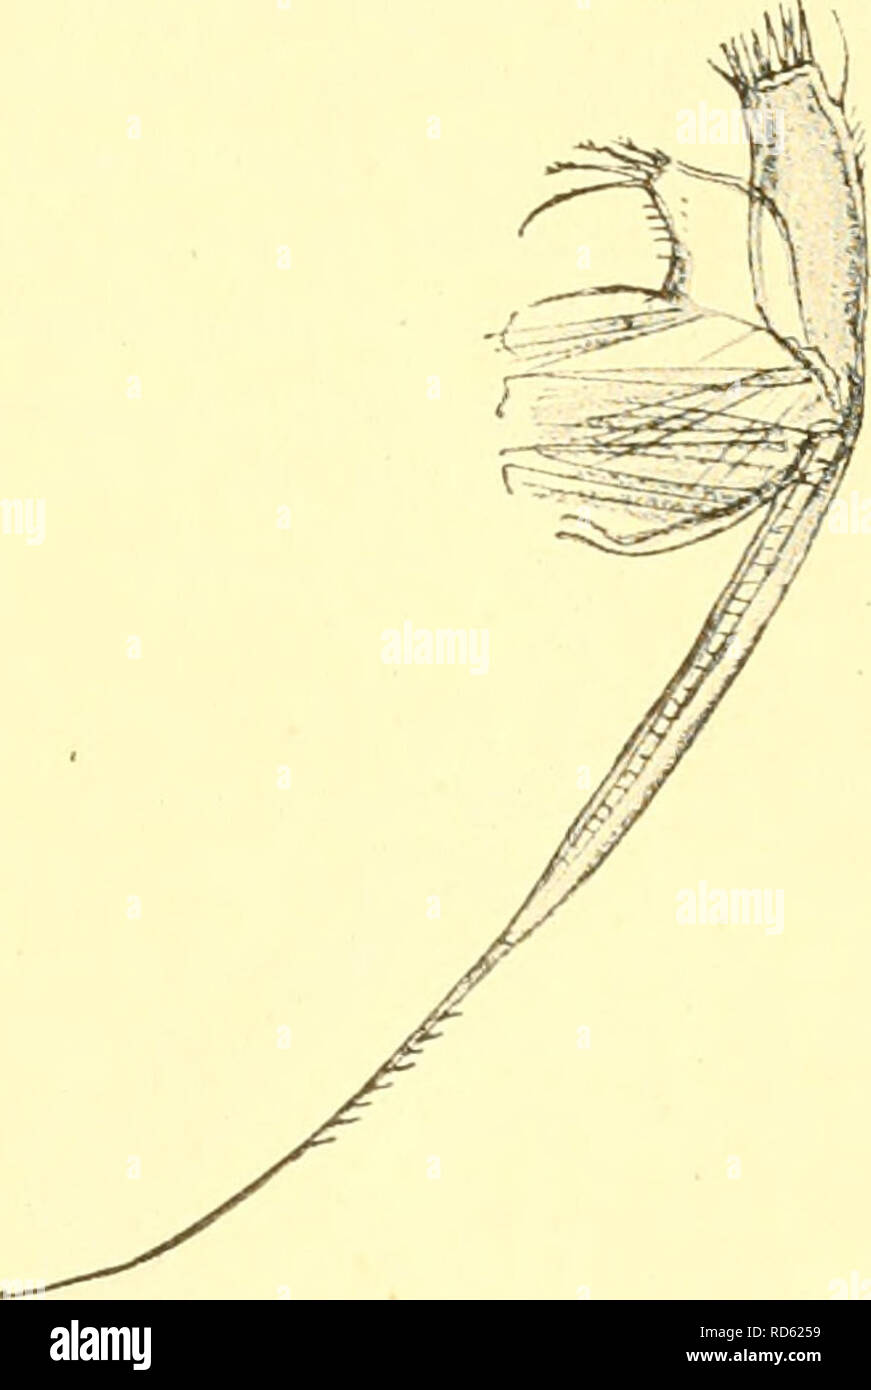 . Cumacea (Sympoda). Cumacea. Fig. 34. L. nasica ((J) (Kroyer), peraeopod 3 (after Sars). Fig. 36. L. nasica (Kroyer), maxilla 1 (after Sars). Body slender and elongate. Pseudorostral lobes in 9 upturned, pro- minent, obliquely truncate with the truncate edges minutely denticulate and setiferous: antero-lateral corners sharply triangular preceded by a deep sinus, followed for some distance by fine serration of the lower margin. In the 6 the lobes are shorter, little upturned, almost transversely truncate, and the antero-lateral corners are obtuse with the sinus obsolete. Carapace in Q with med Stock Photo